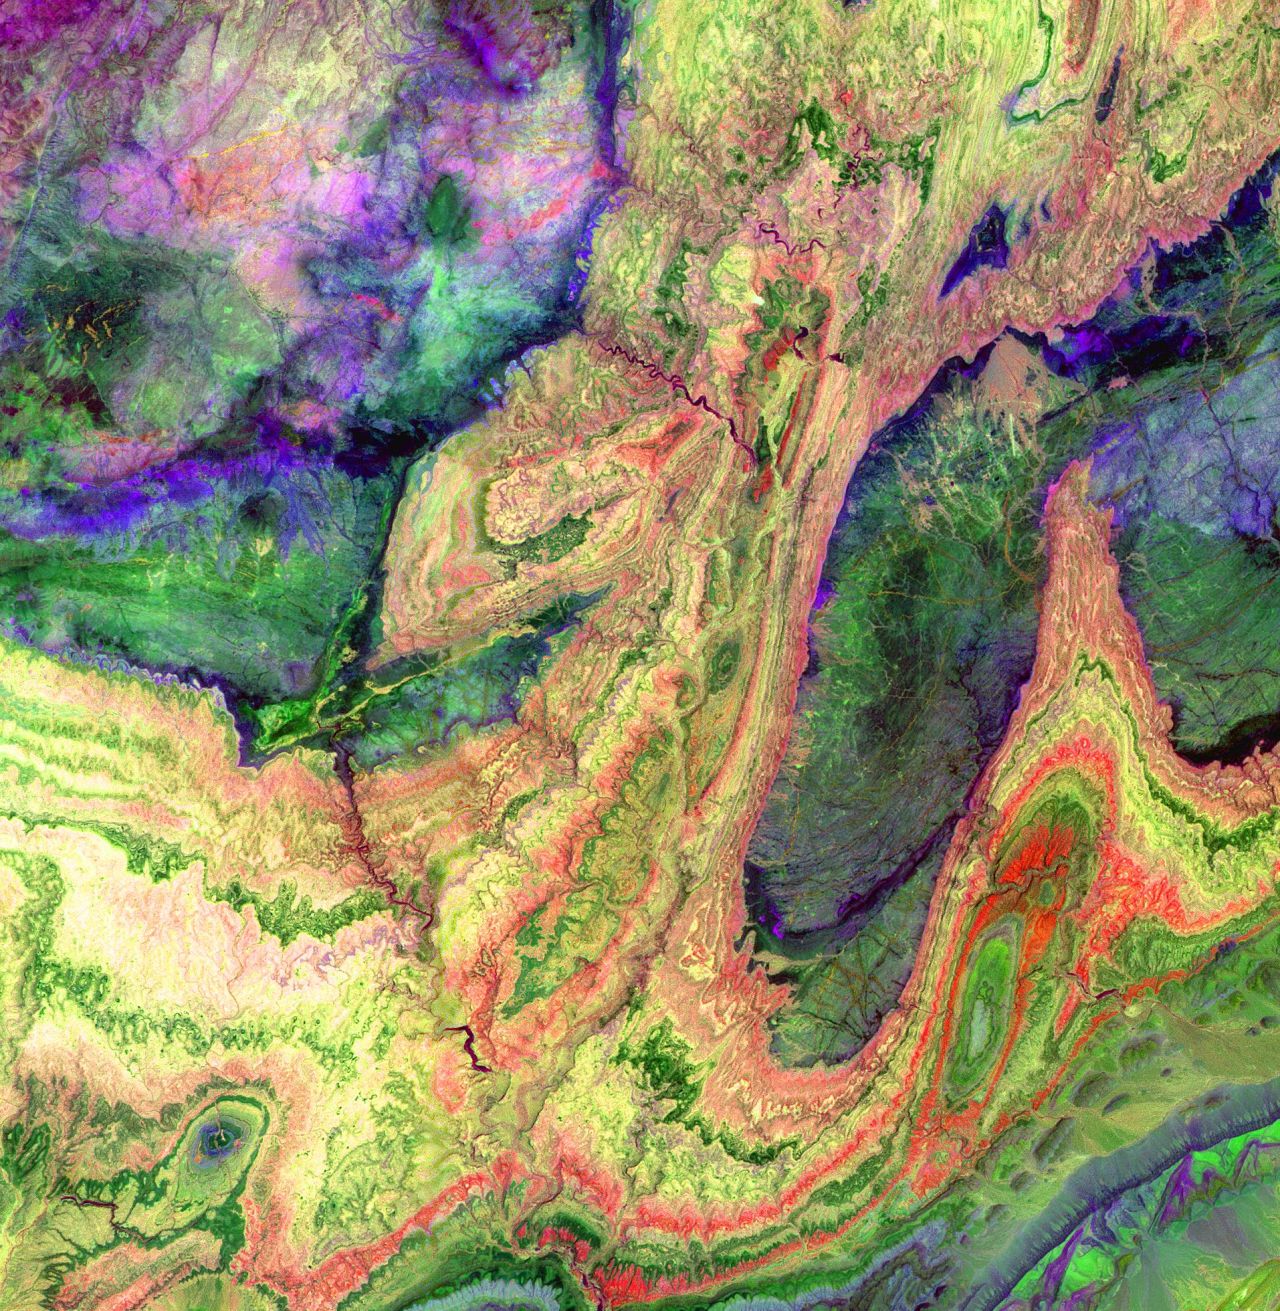 <strong>The Anti-Atlas Mountains, Morocco: </strong>The swirling hues of the Anti-Atlas Mountains were captured by ASTER (Advanced Spaceborne Thermal Emission and Reflection Radiometer) on NASA's Terra satellite. Formed roughly 80 million years ago, the mountains formed when Africa and Eurasia collided, resulting in a diverse composition of limestone, sandstone, gypsum and granitic rocks.   